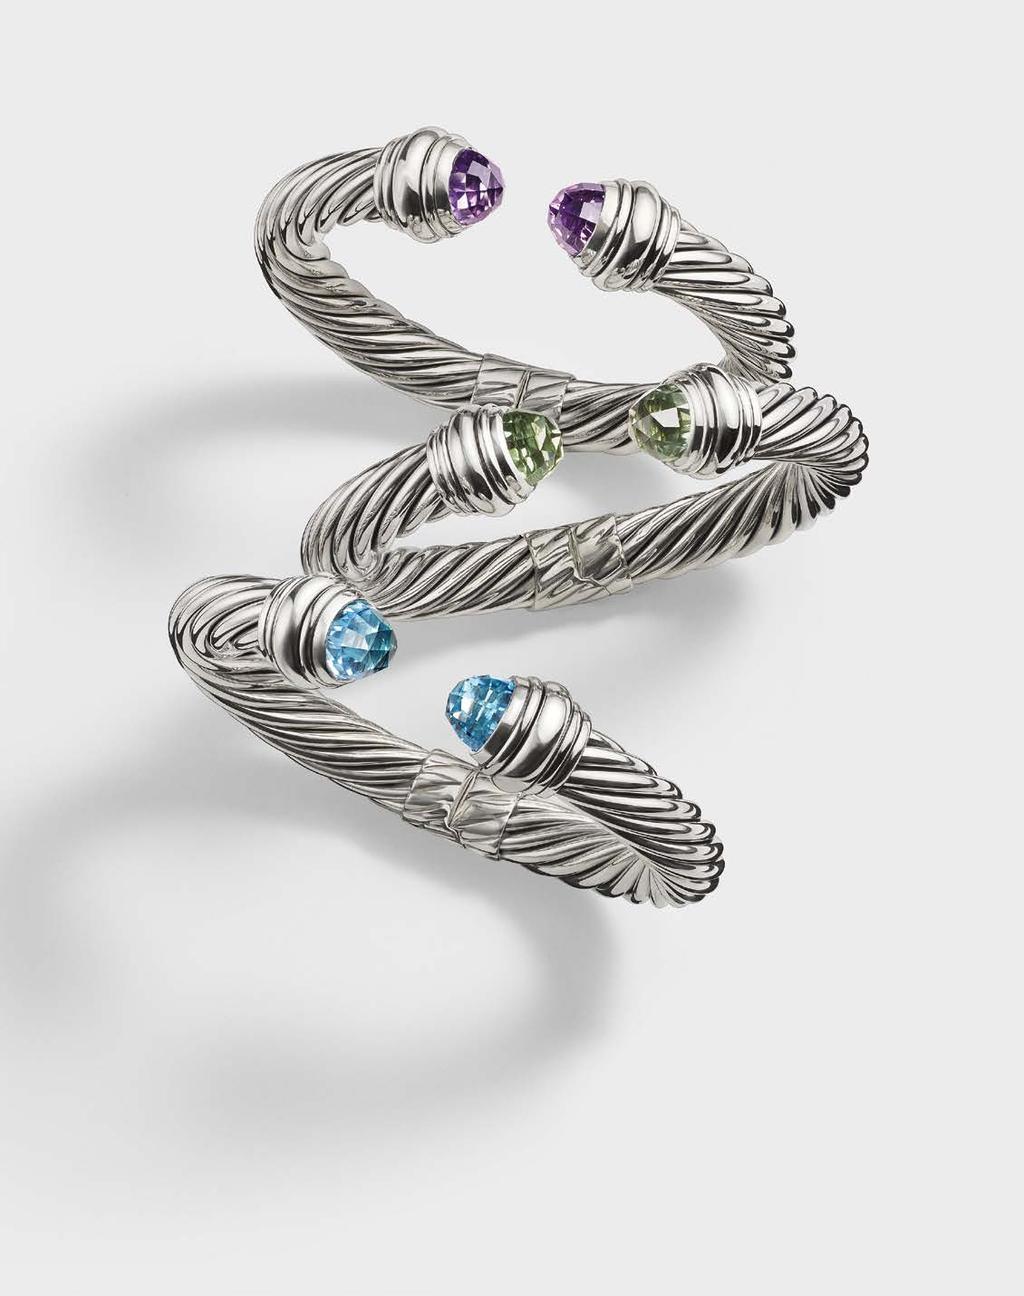 The Cable Collection 10mm bracelet in sterling silver with amethyst, starting at $1,350.